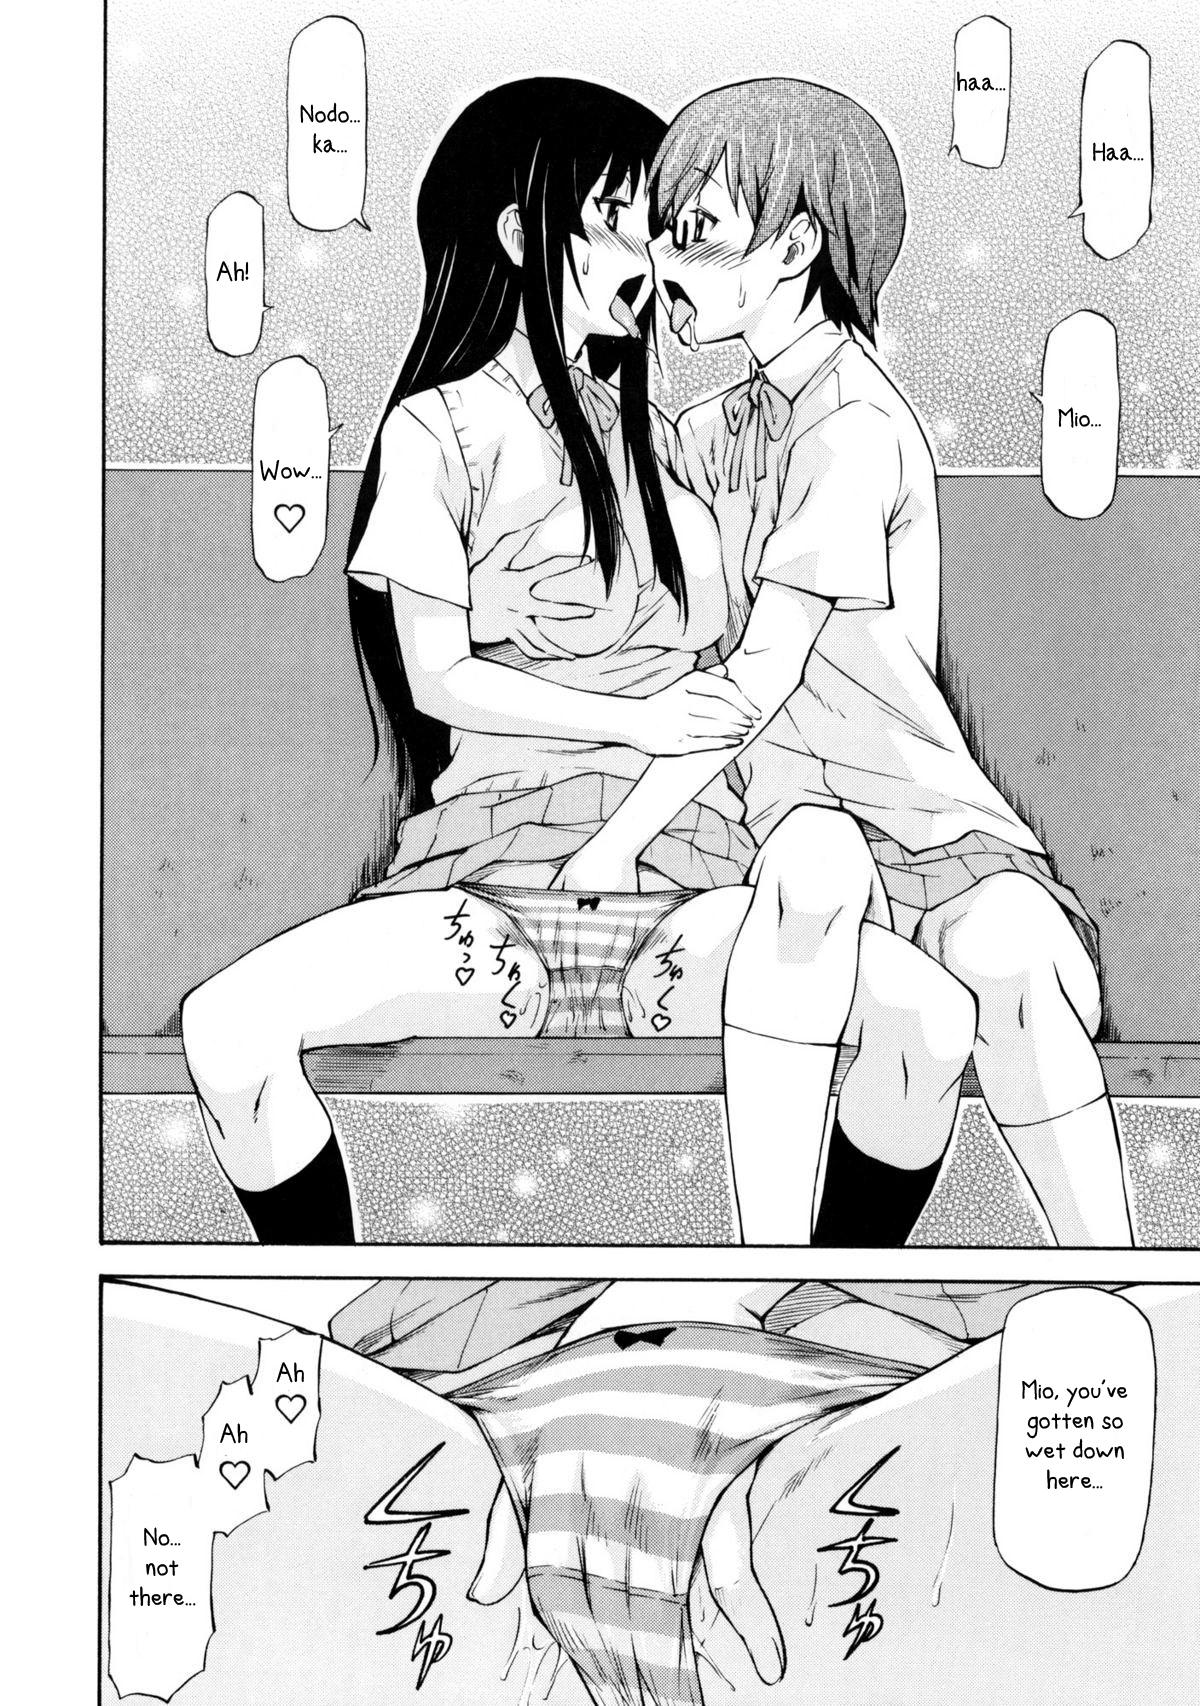 18 Year Old LeLe Pappa Vol.16 Re;Re; - K-on Double Penetration - Page 9